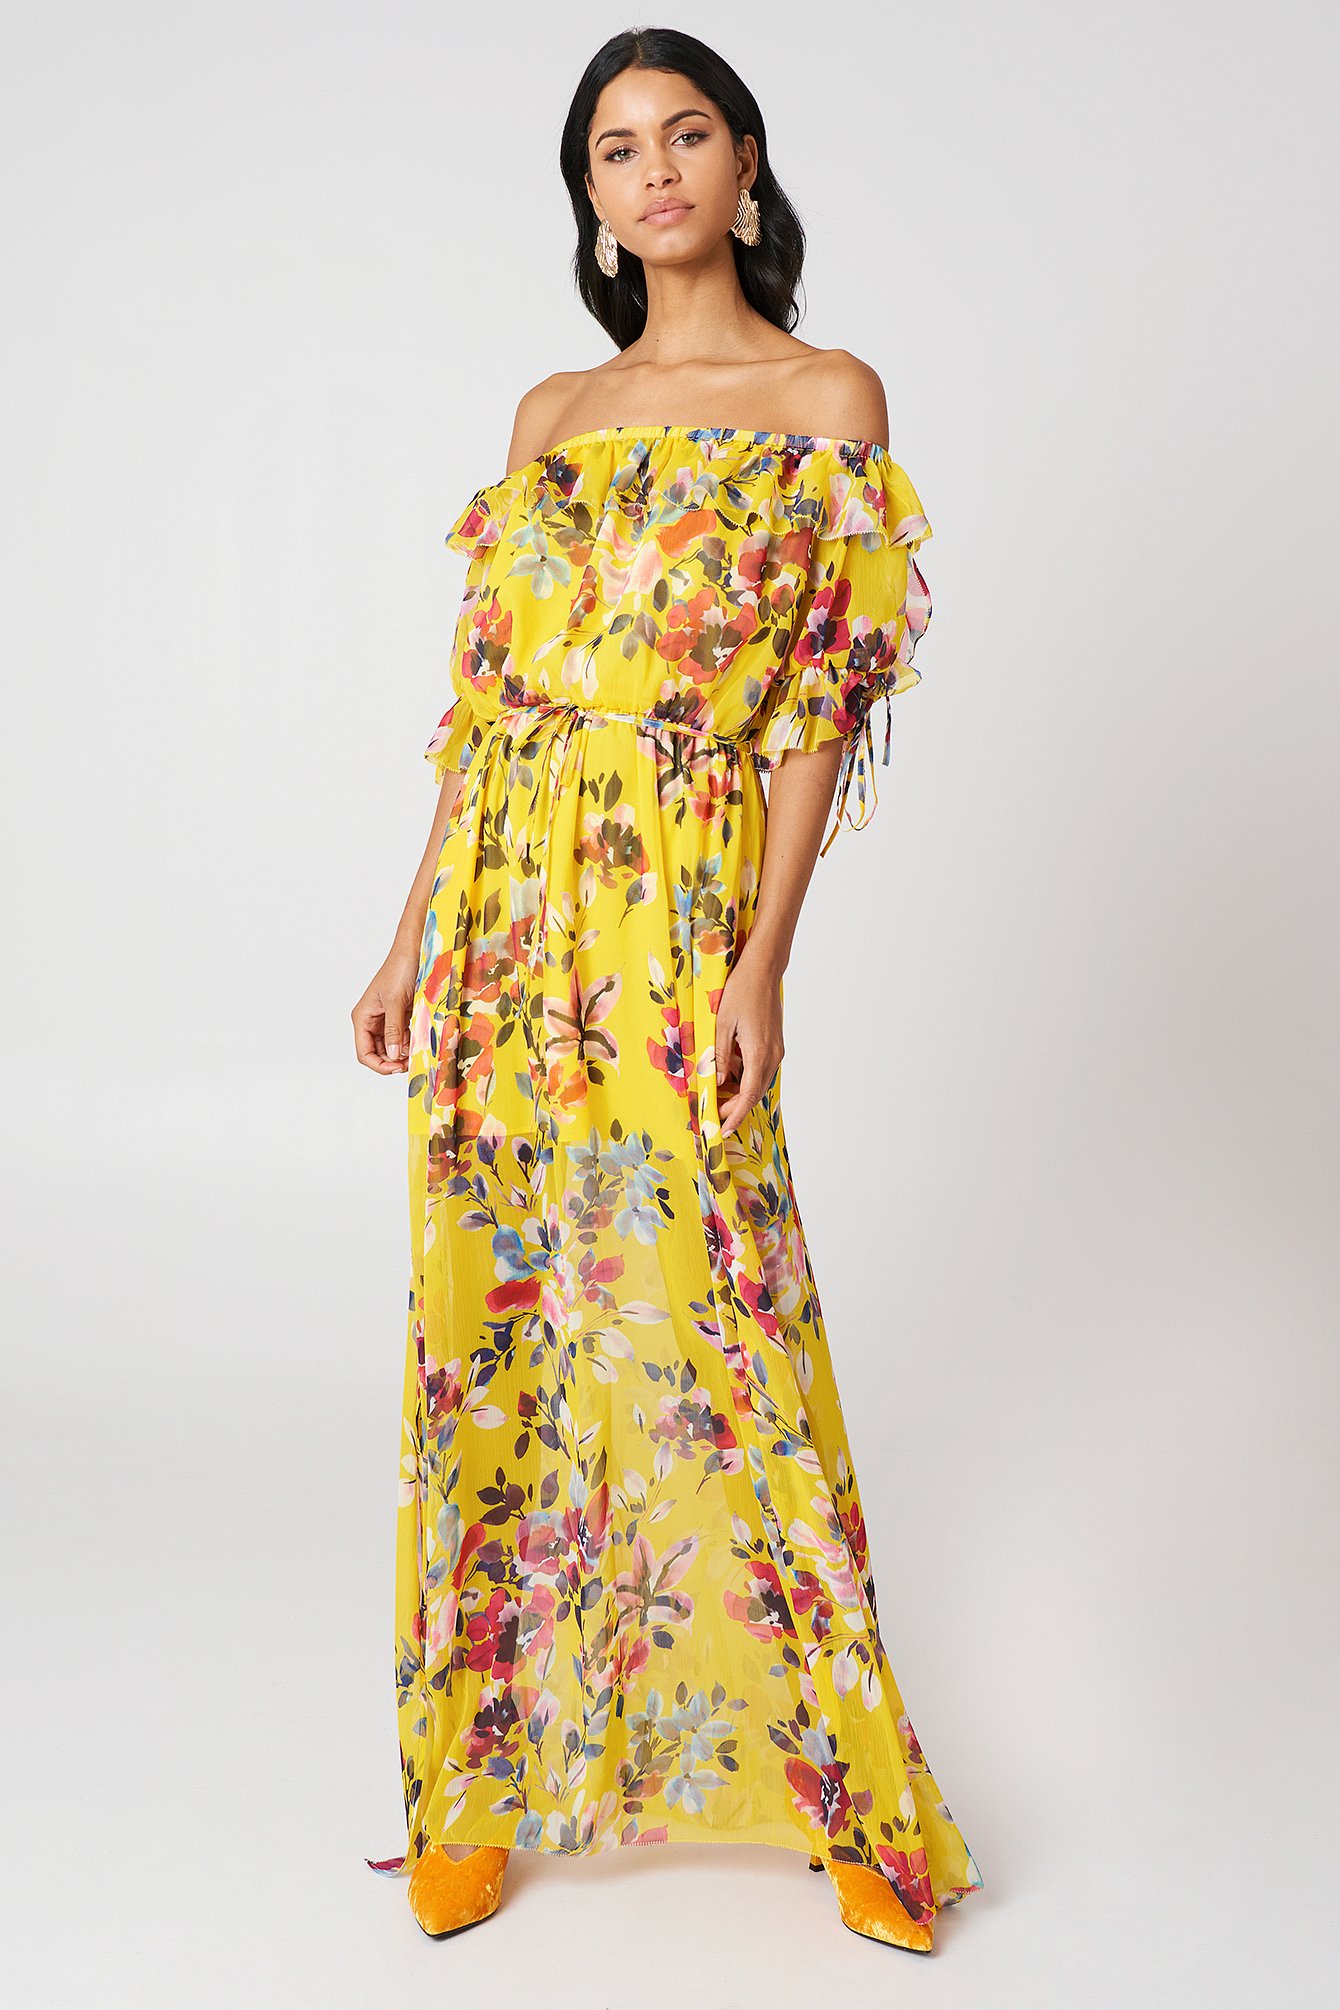 FRENCH CONNECTION LINOSA MAXI DRESS - MULTICOLOR, YELLOW